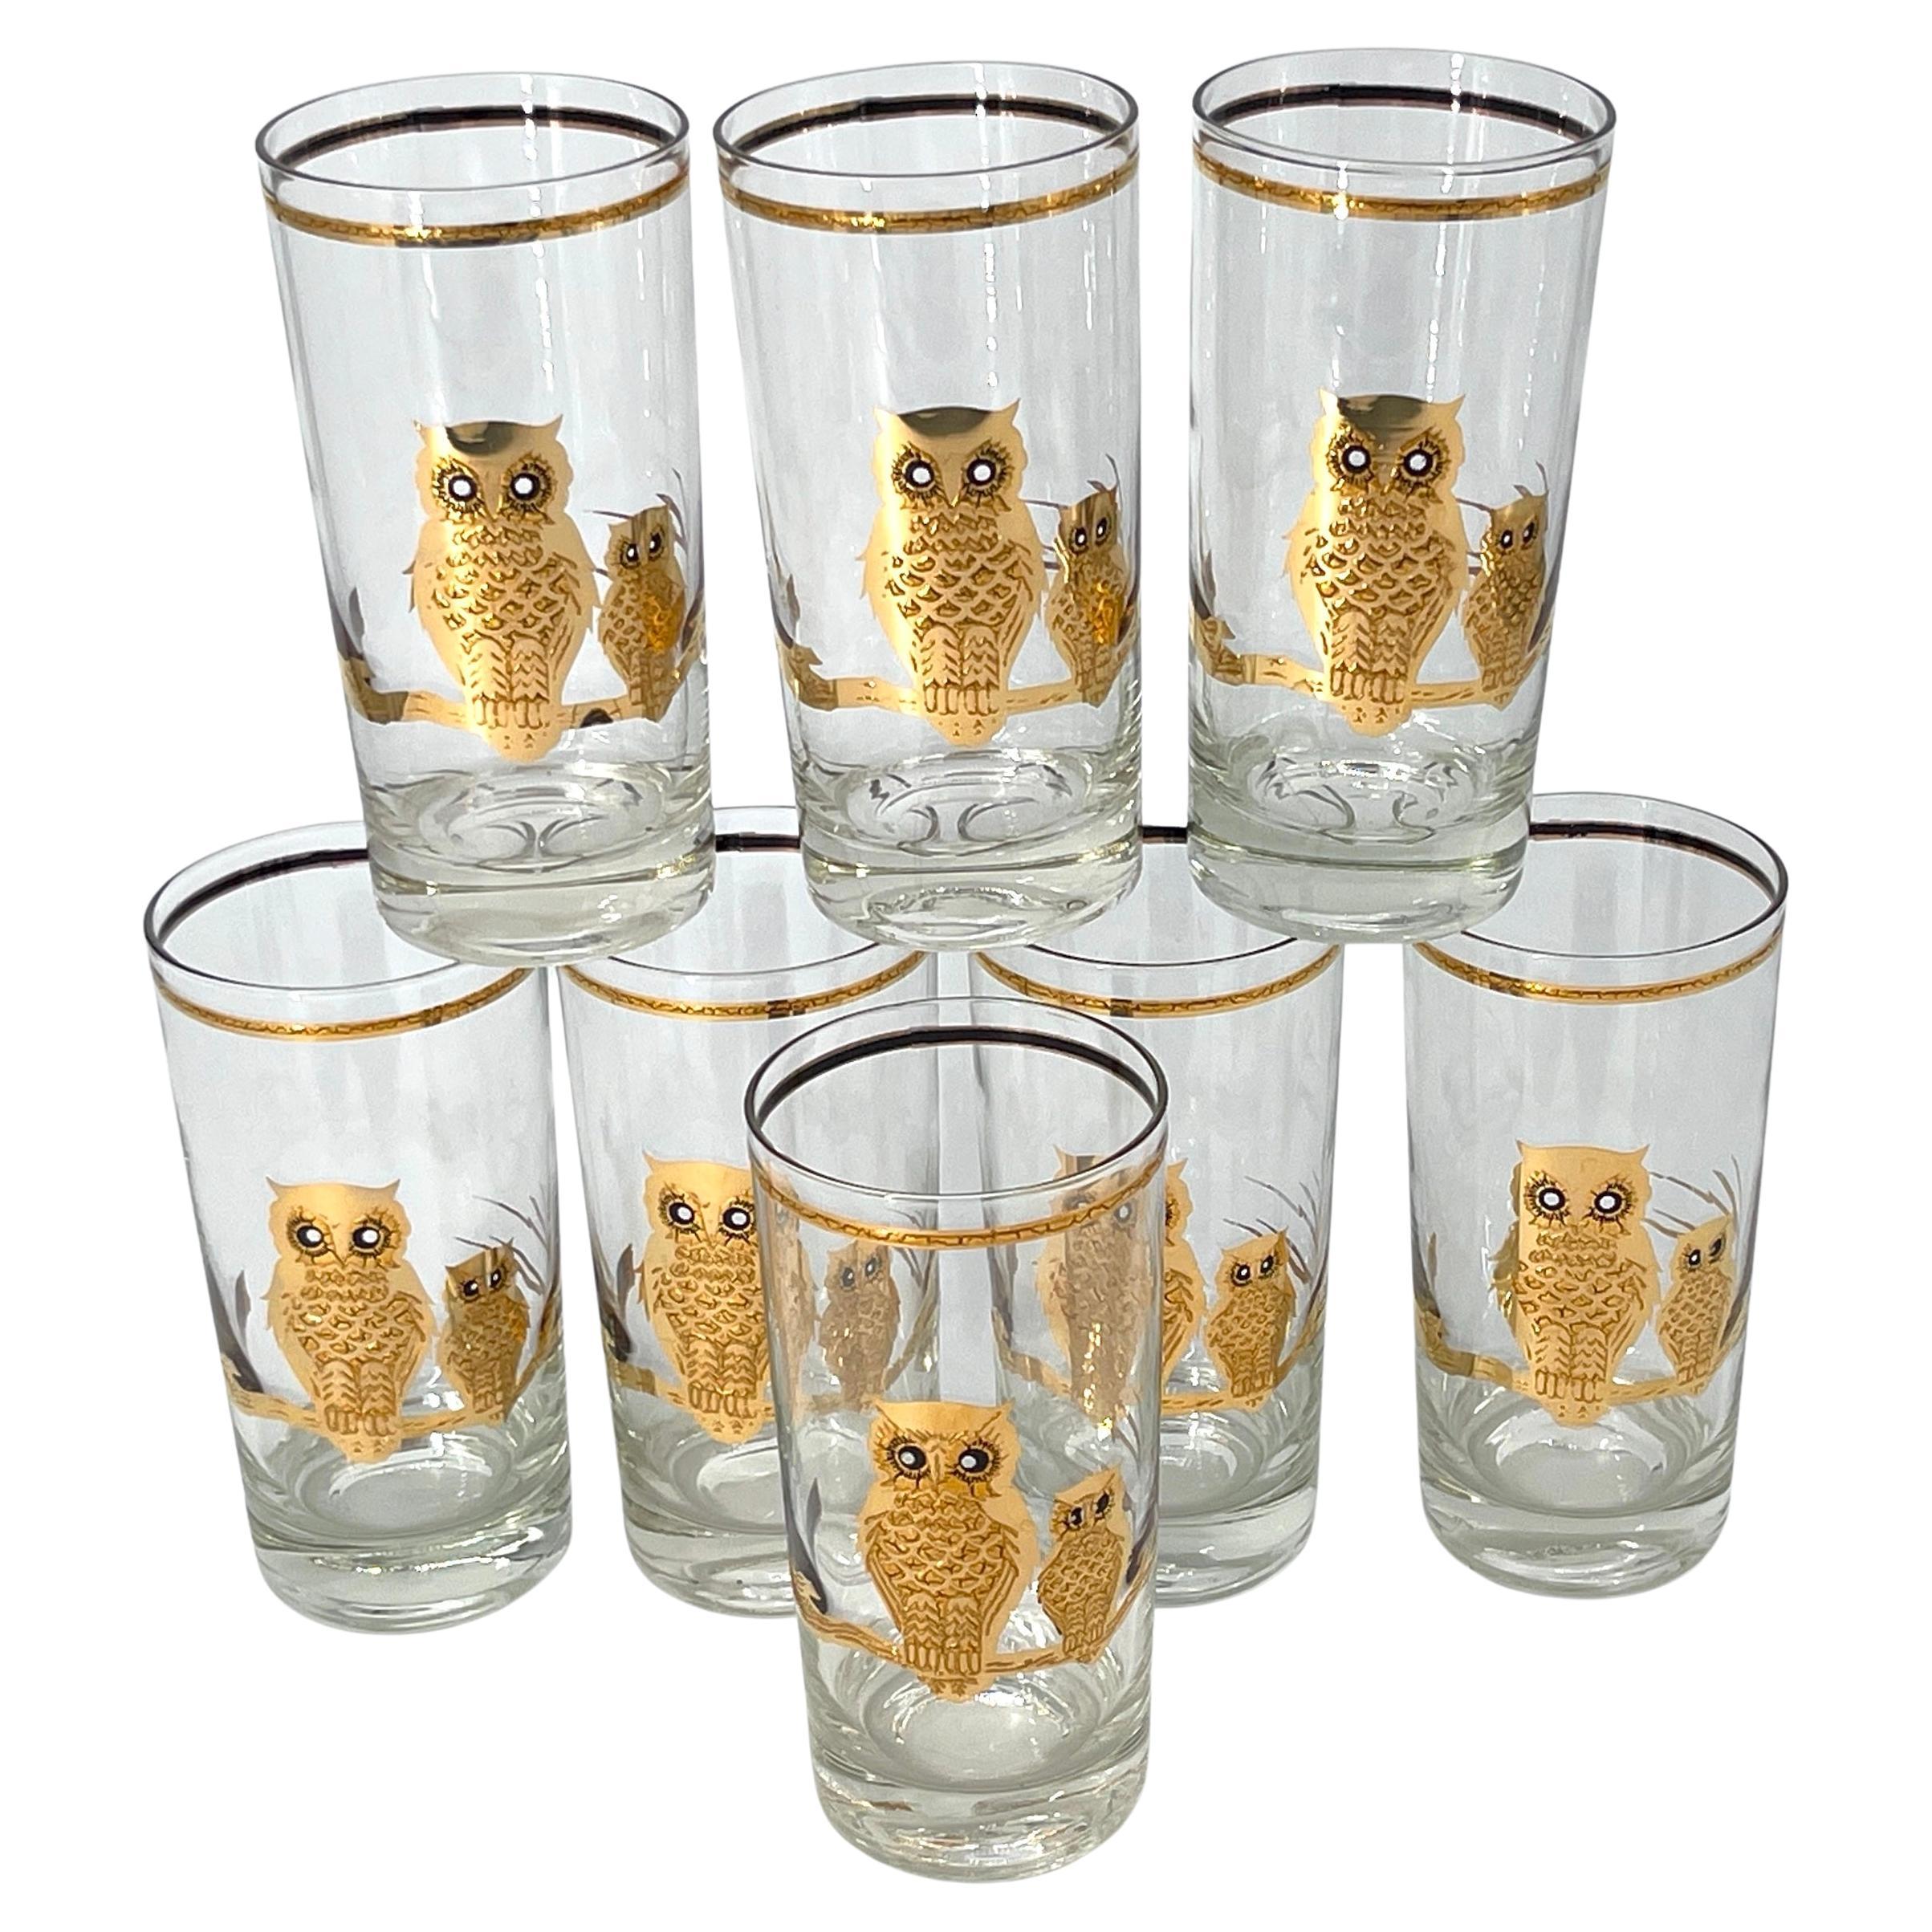 8 Mid Century Modern 22K Gold Enameled Owl Motif Highball Glasses by Culver For Sale